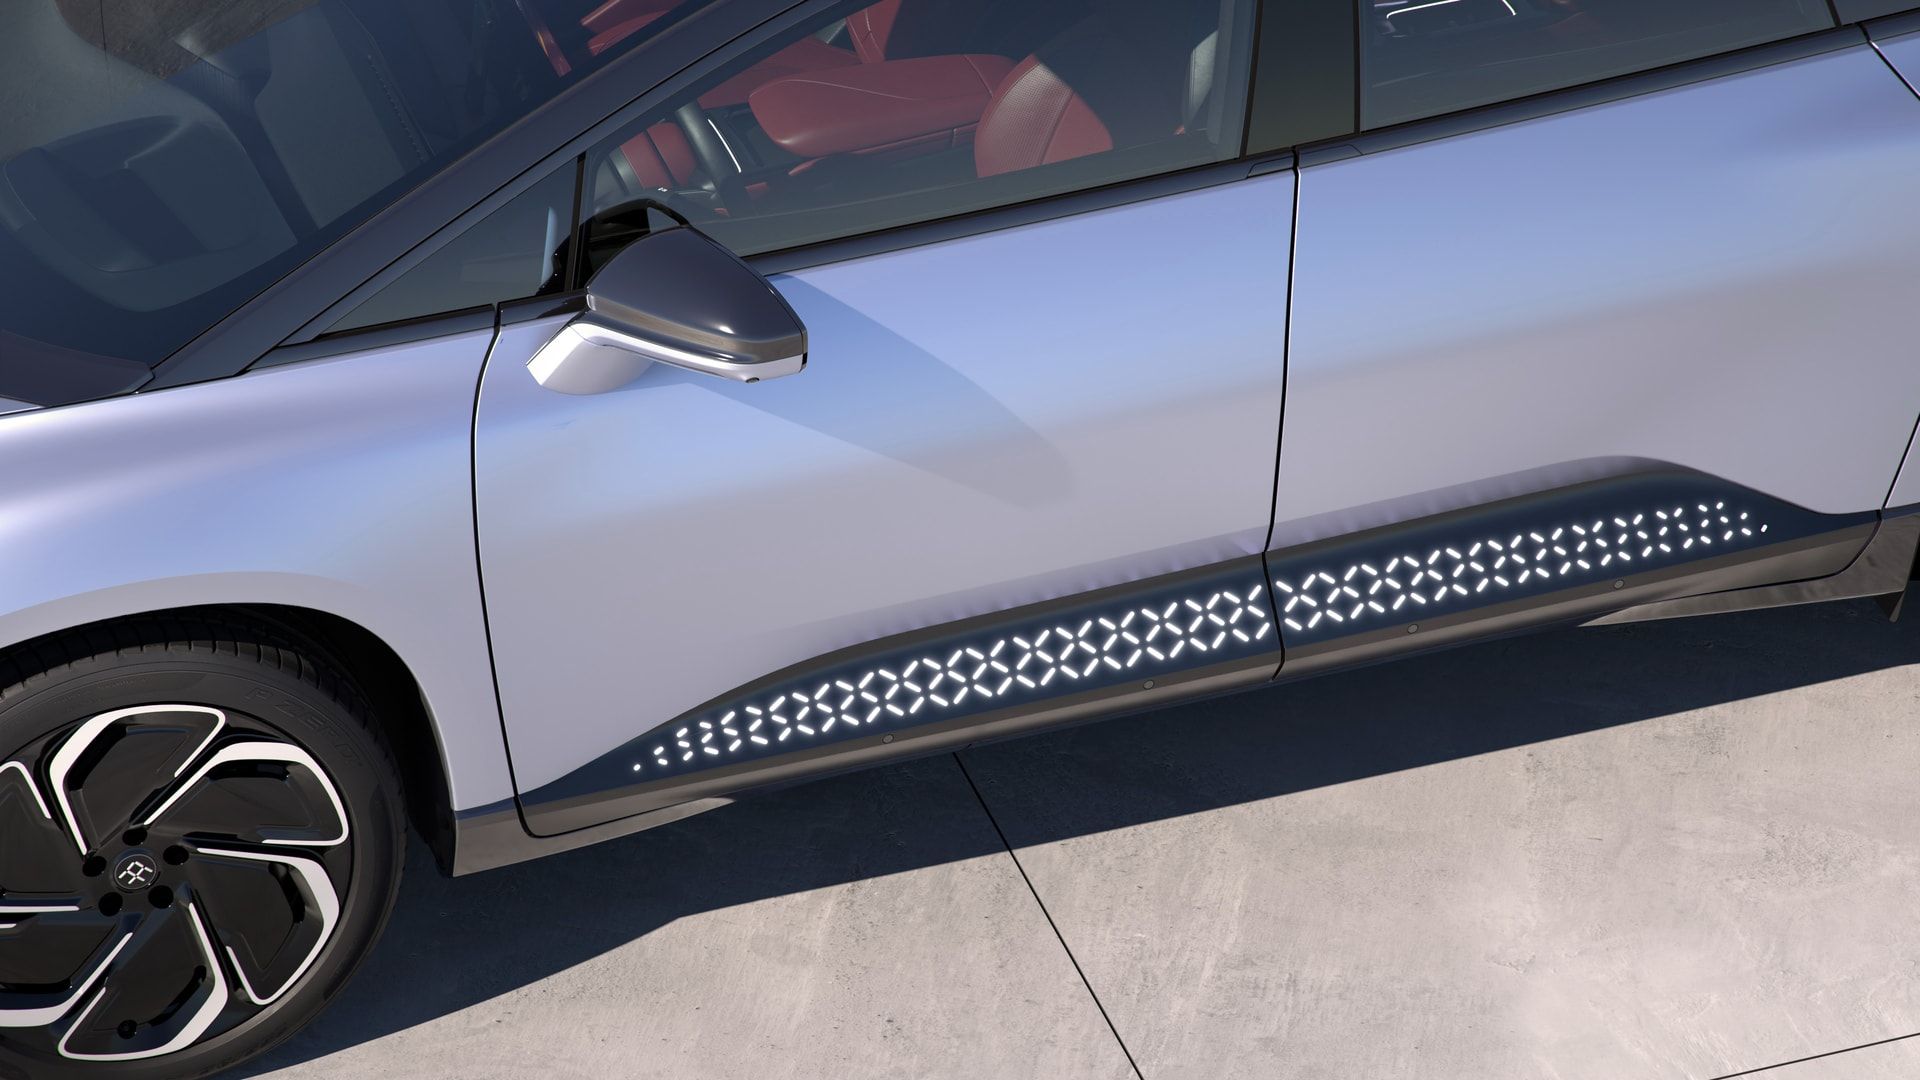 A detail shot of the led side skirts of the Faraday Future FF91